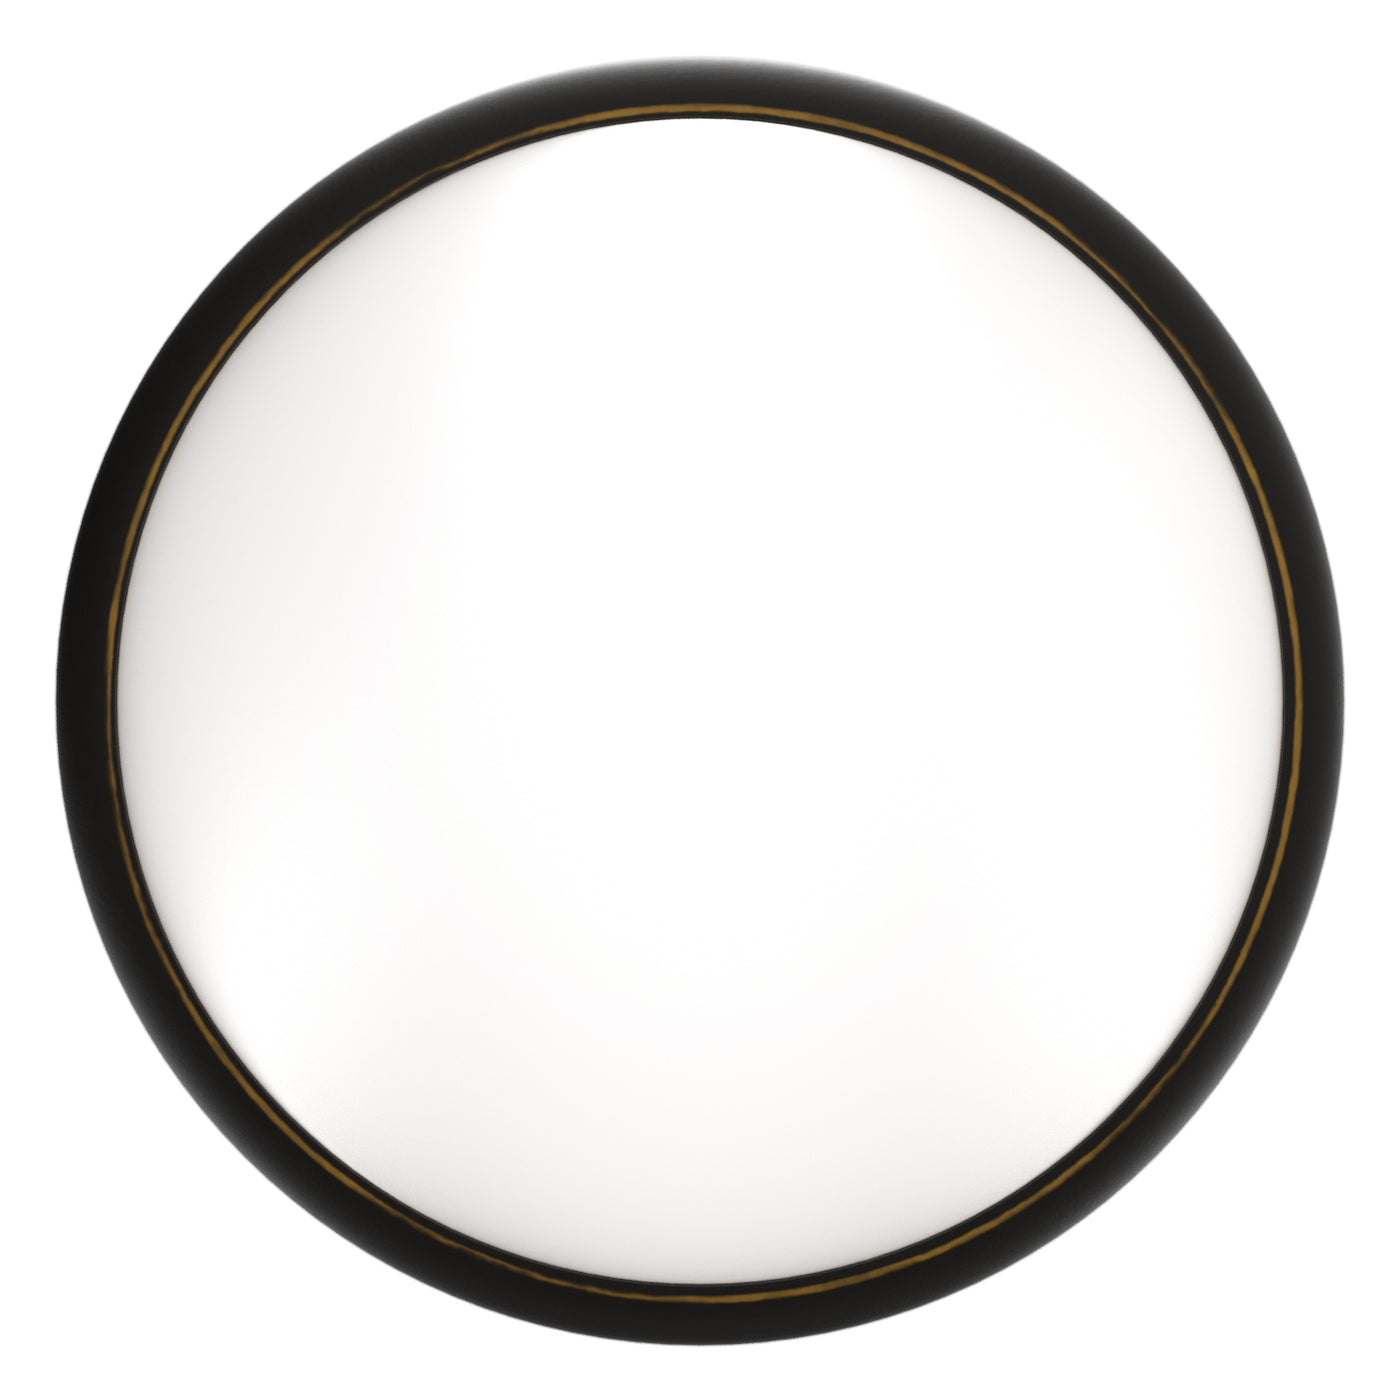 Luminosa 13 Inch Modern Round Flush Mount LED Light with Oil Rubbed Bronze Finish